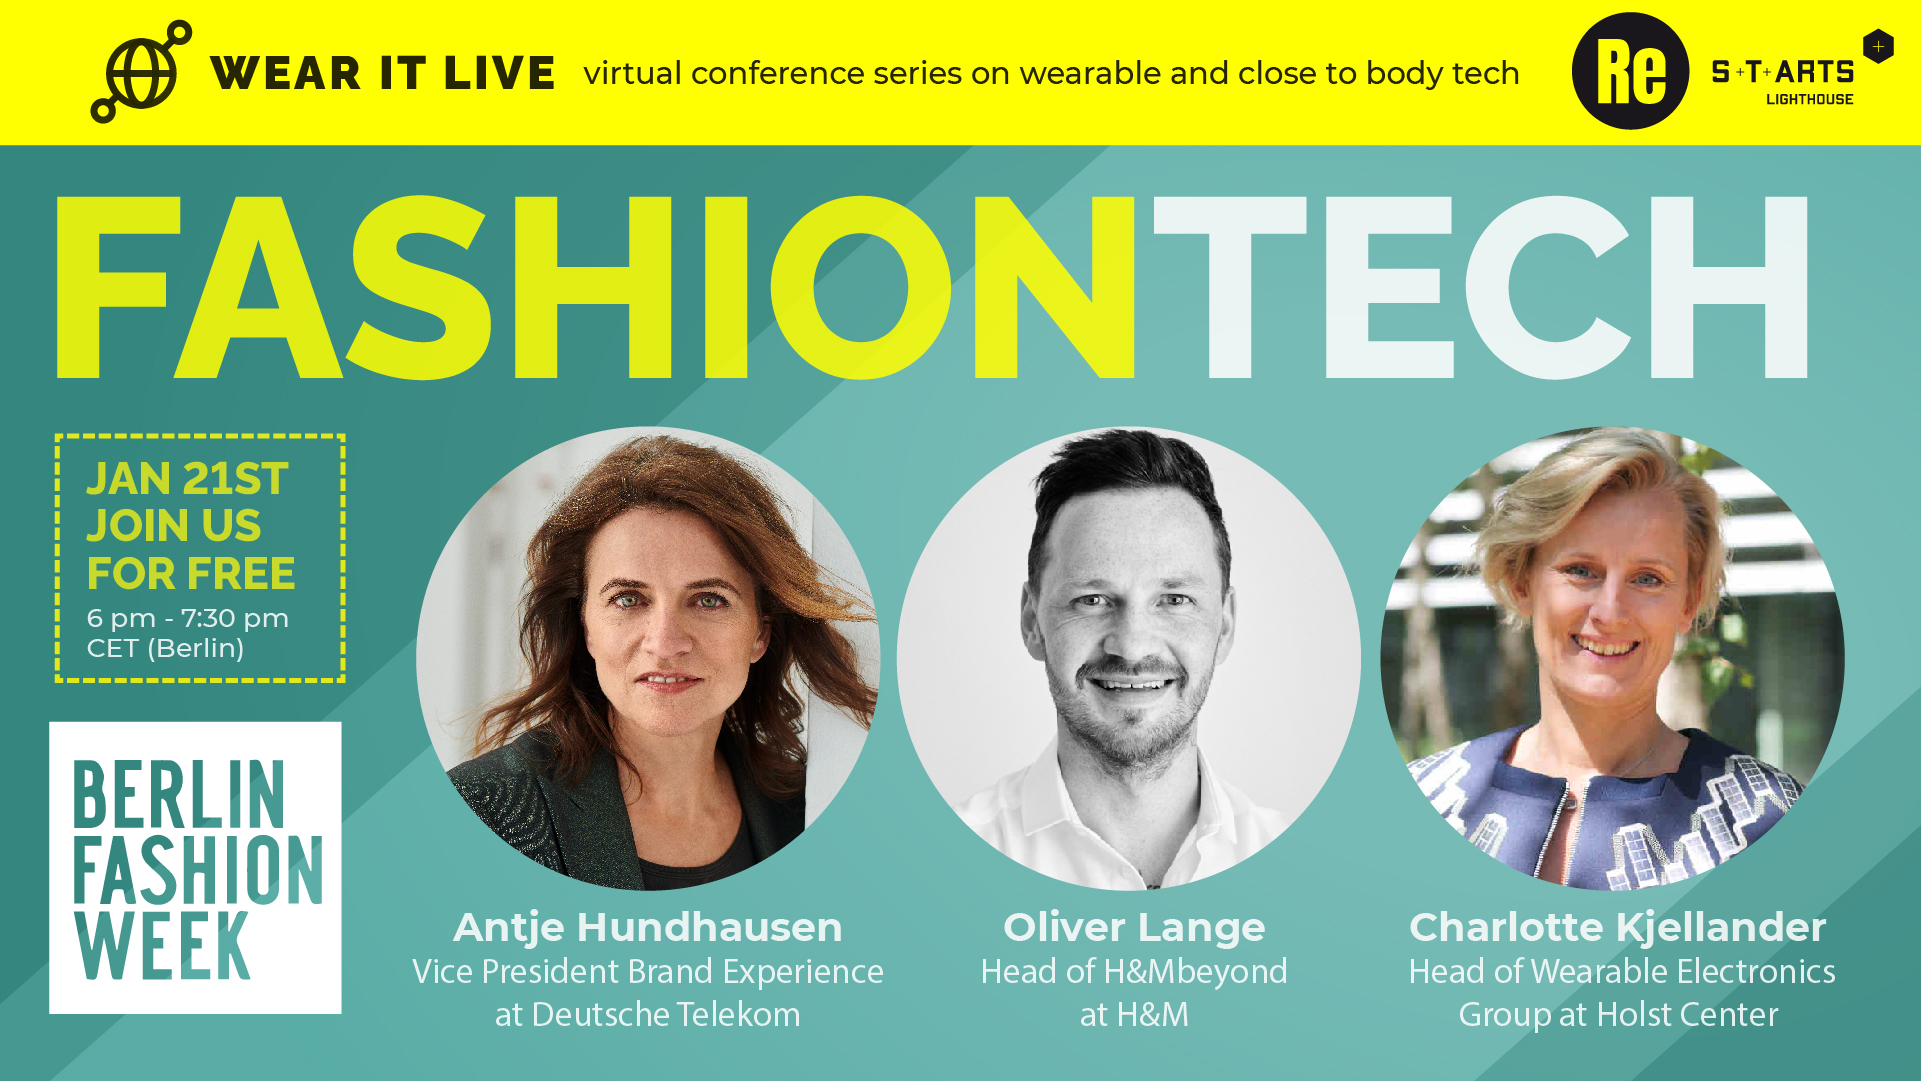 Wear It Live is a global series of virtual events focused on wearables and body-related technologies